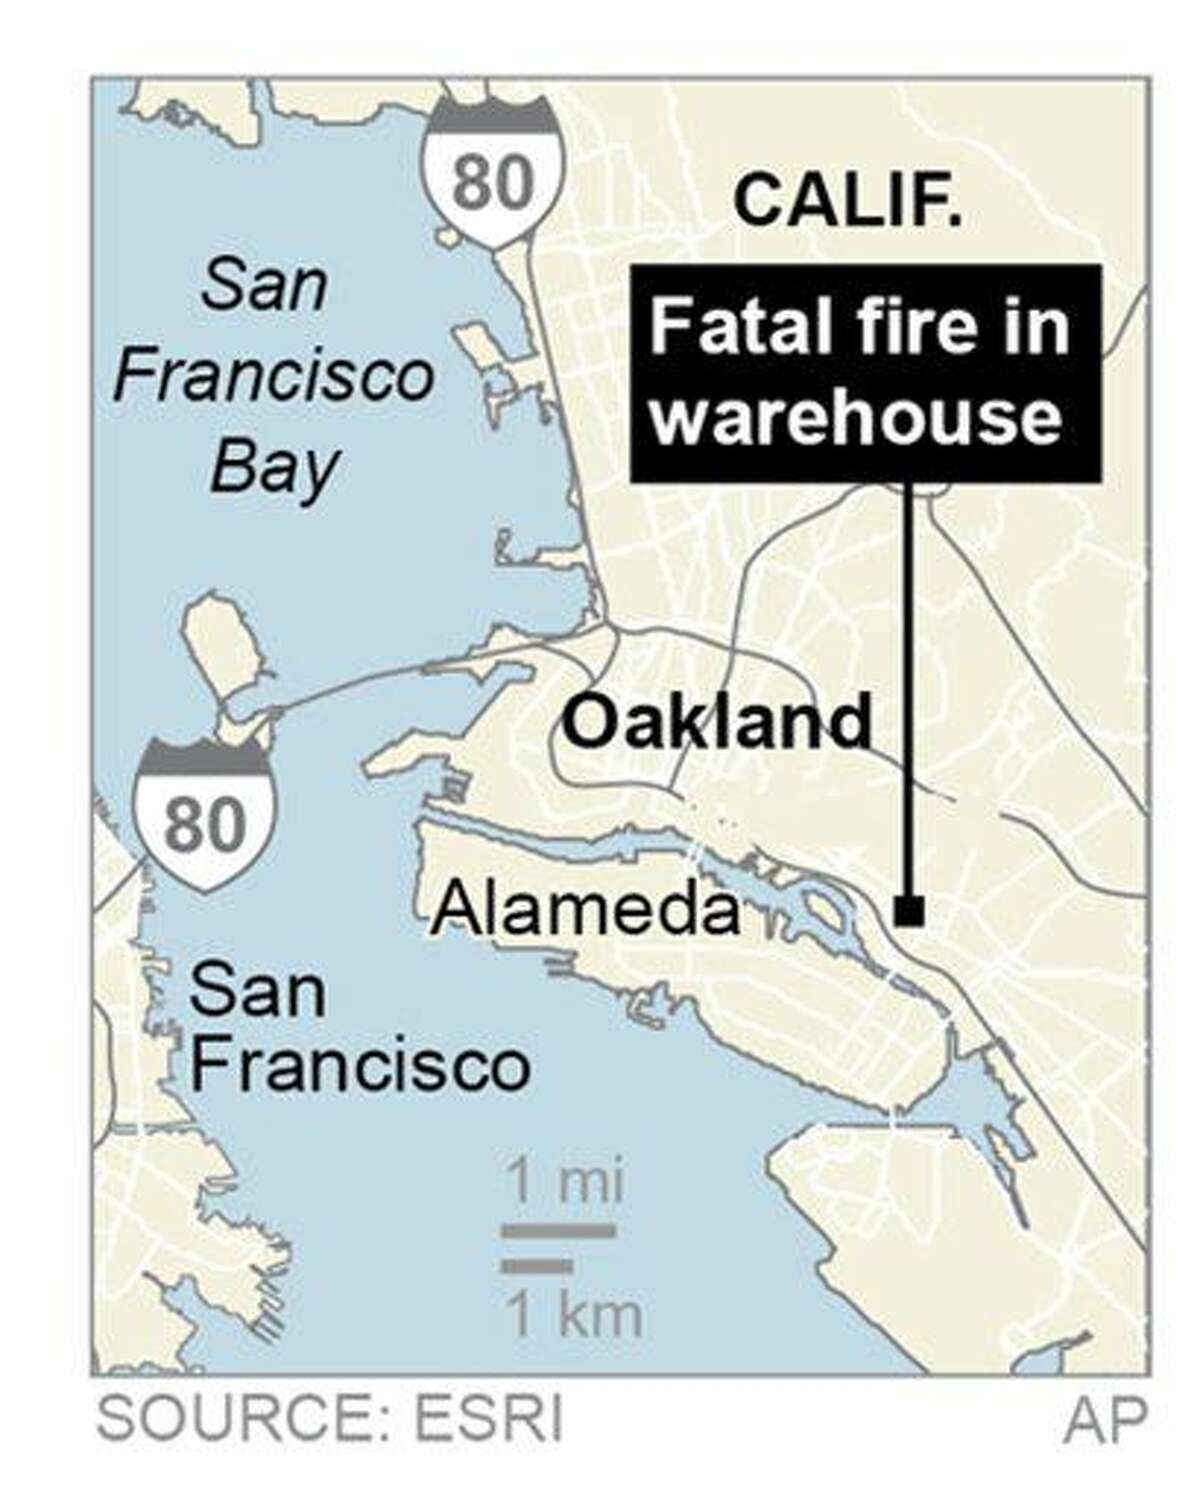 San Francisco Bay Area authorities say a fire has broken out at an Oakland warehouse.; 1c x 4 inches; 46.5 mm x 101 mm;